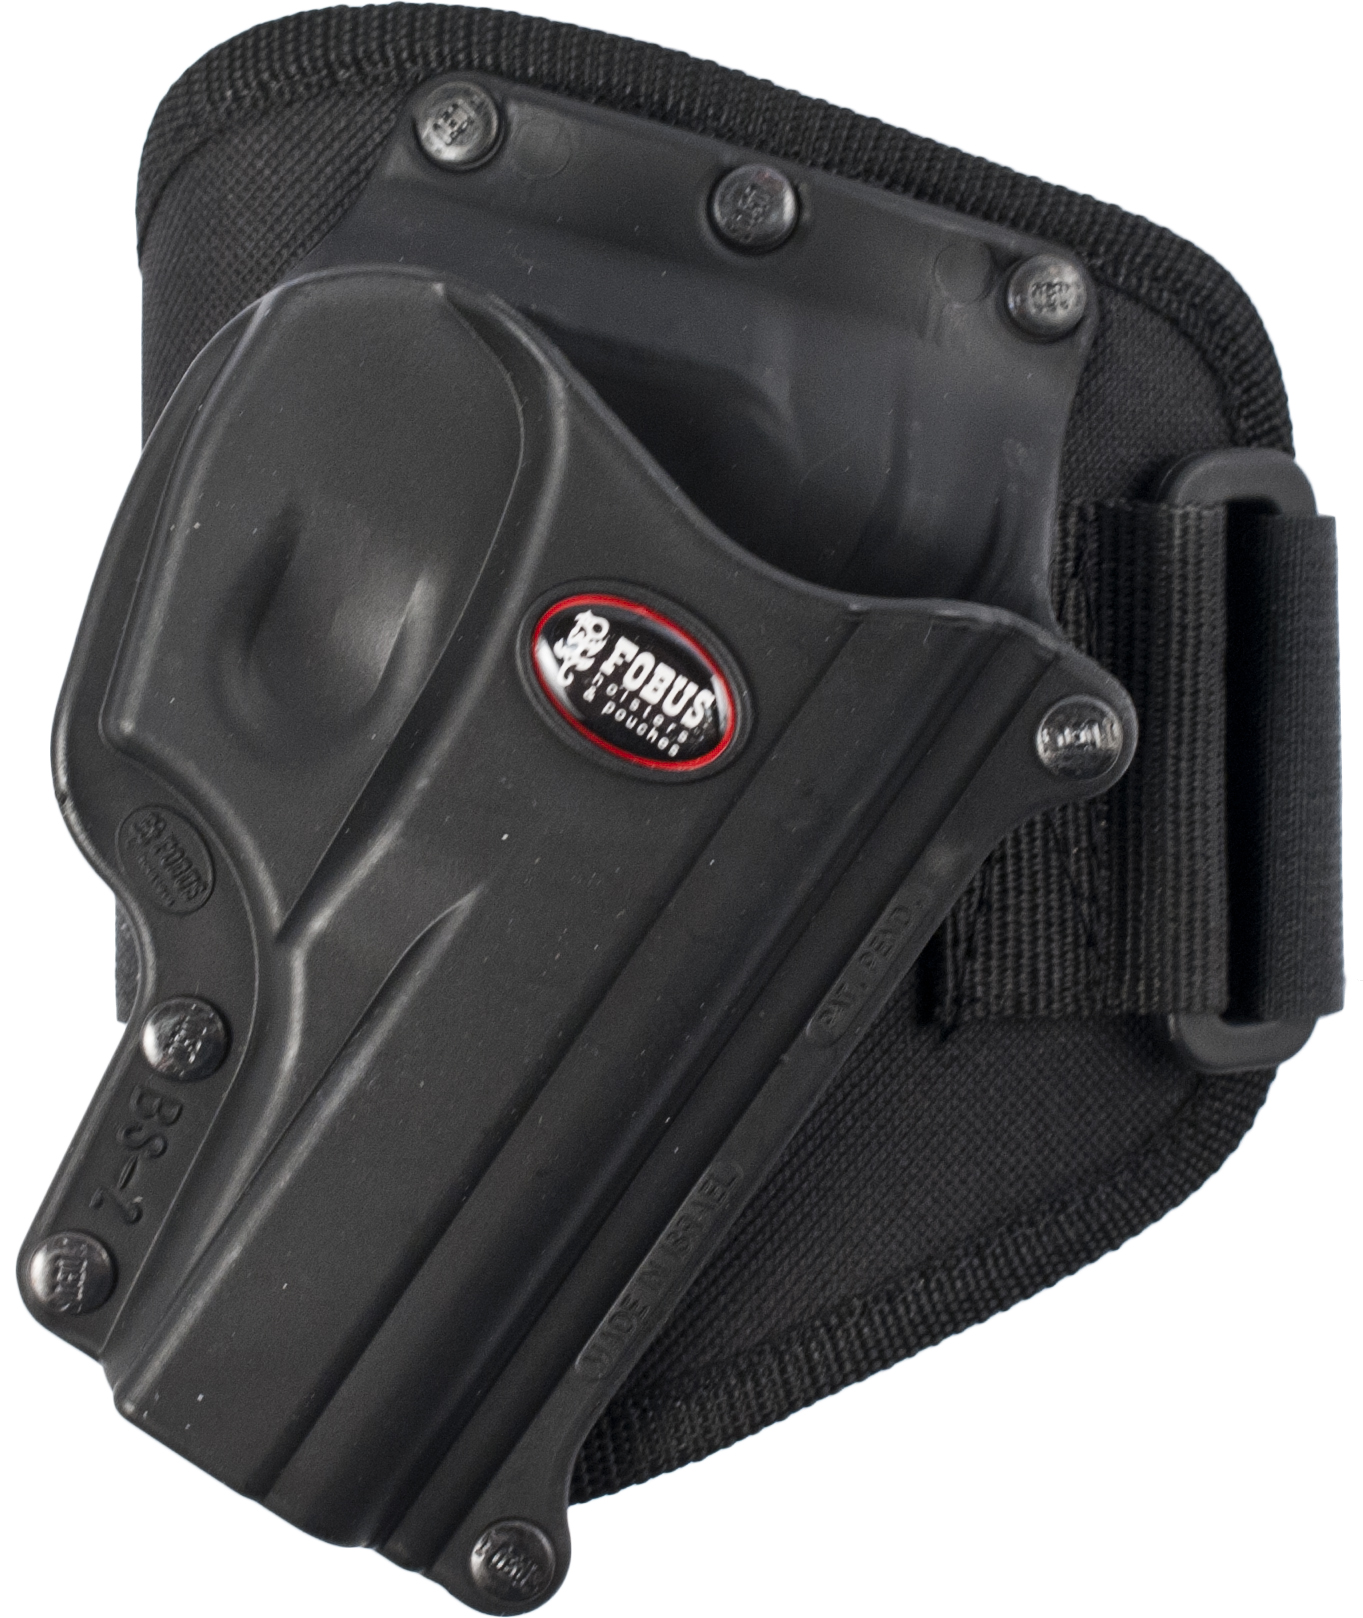 ANKLE Concealment GUN Holster  BERSA THUNDER 380  SECURITY  LAW  TARGET   702 R 